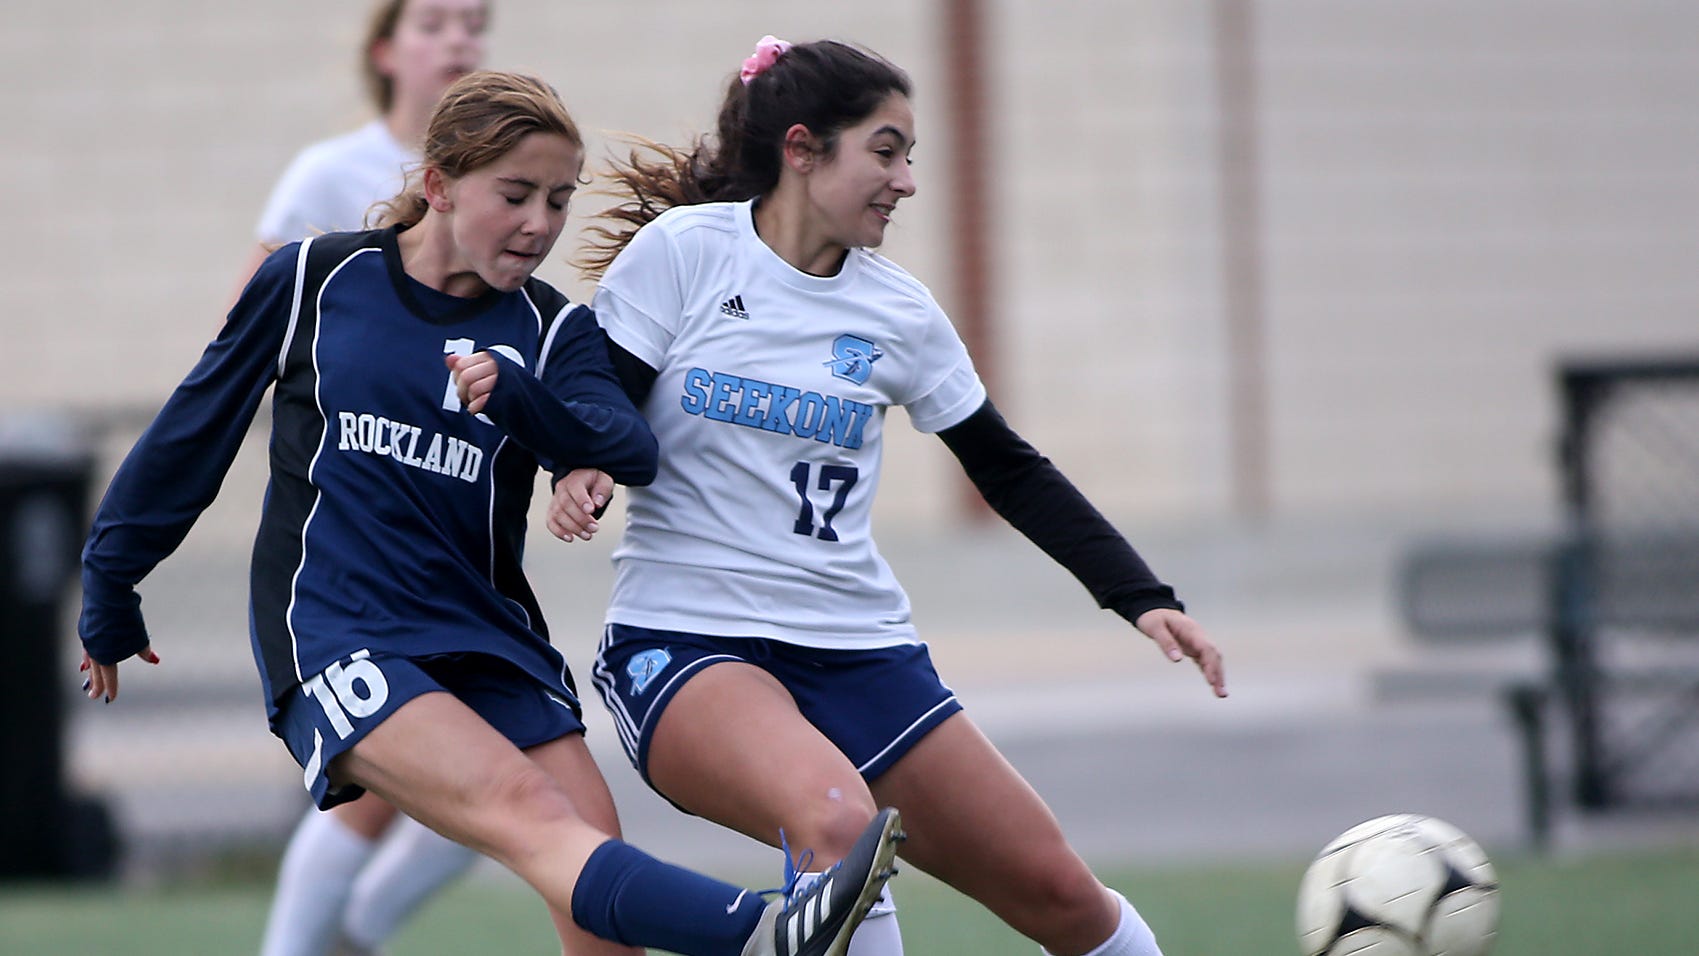 Dunham leads Rockland girls soccer to Div. 3 state playoff victory - and other high school scores